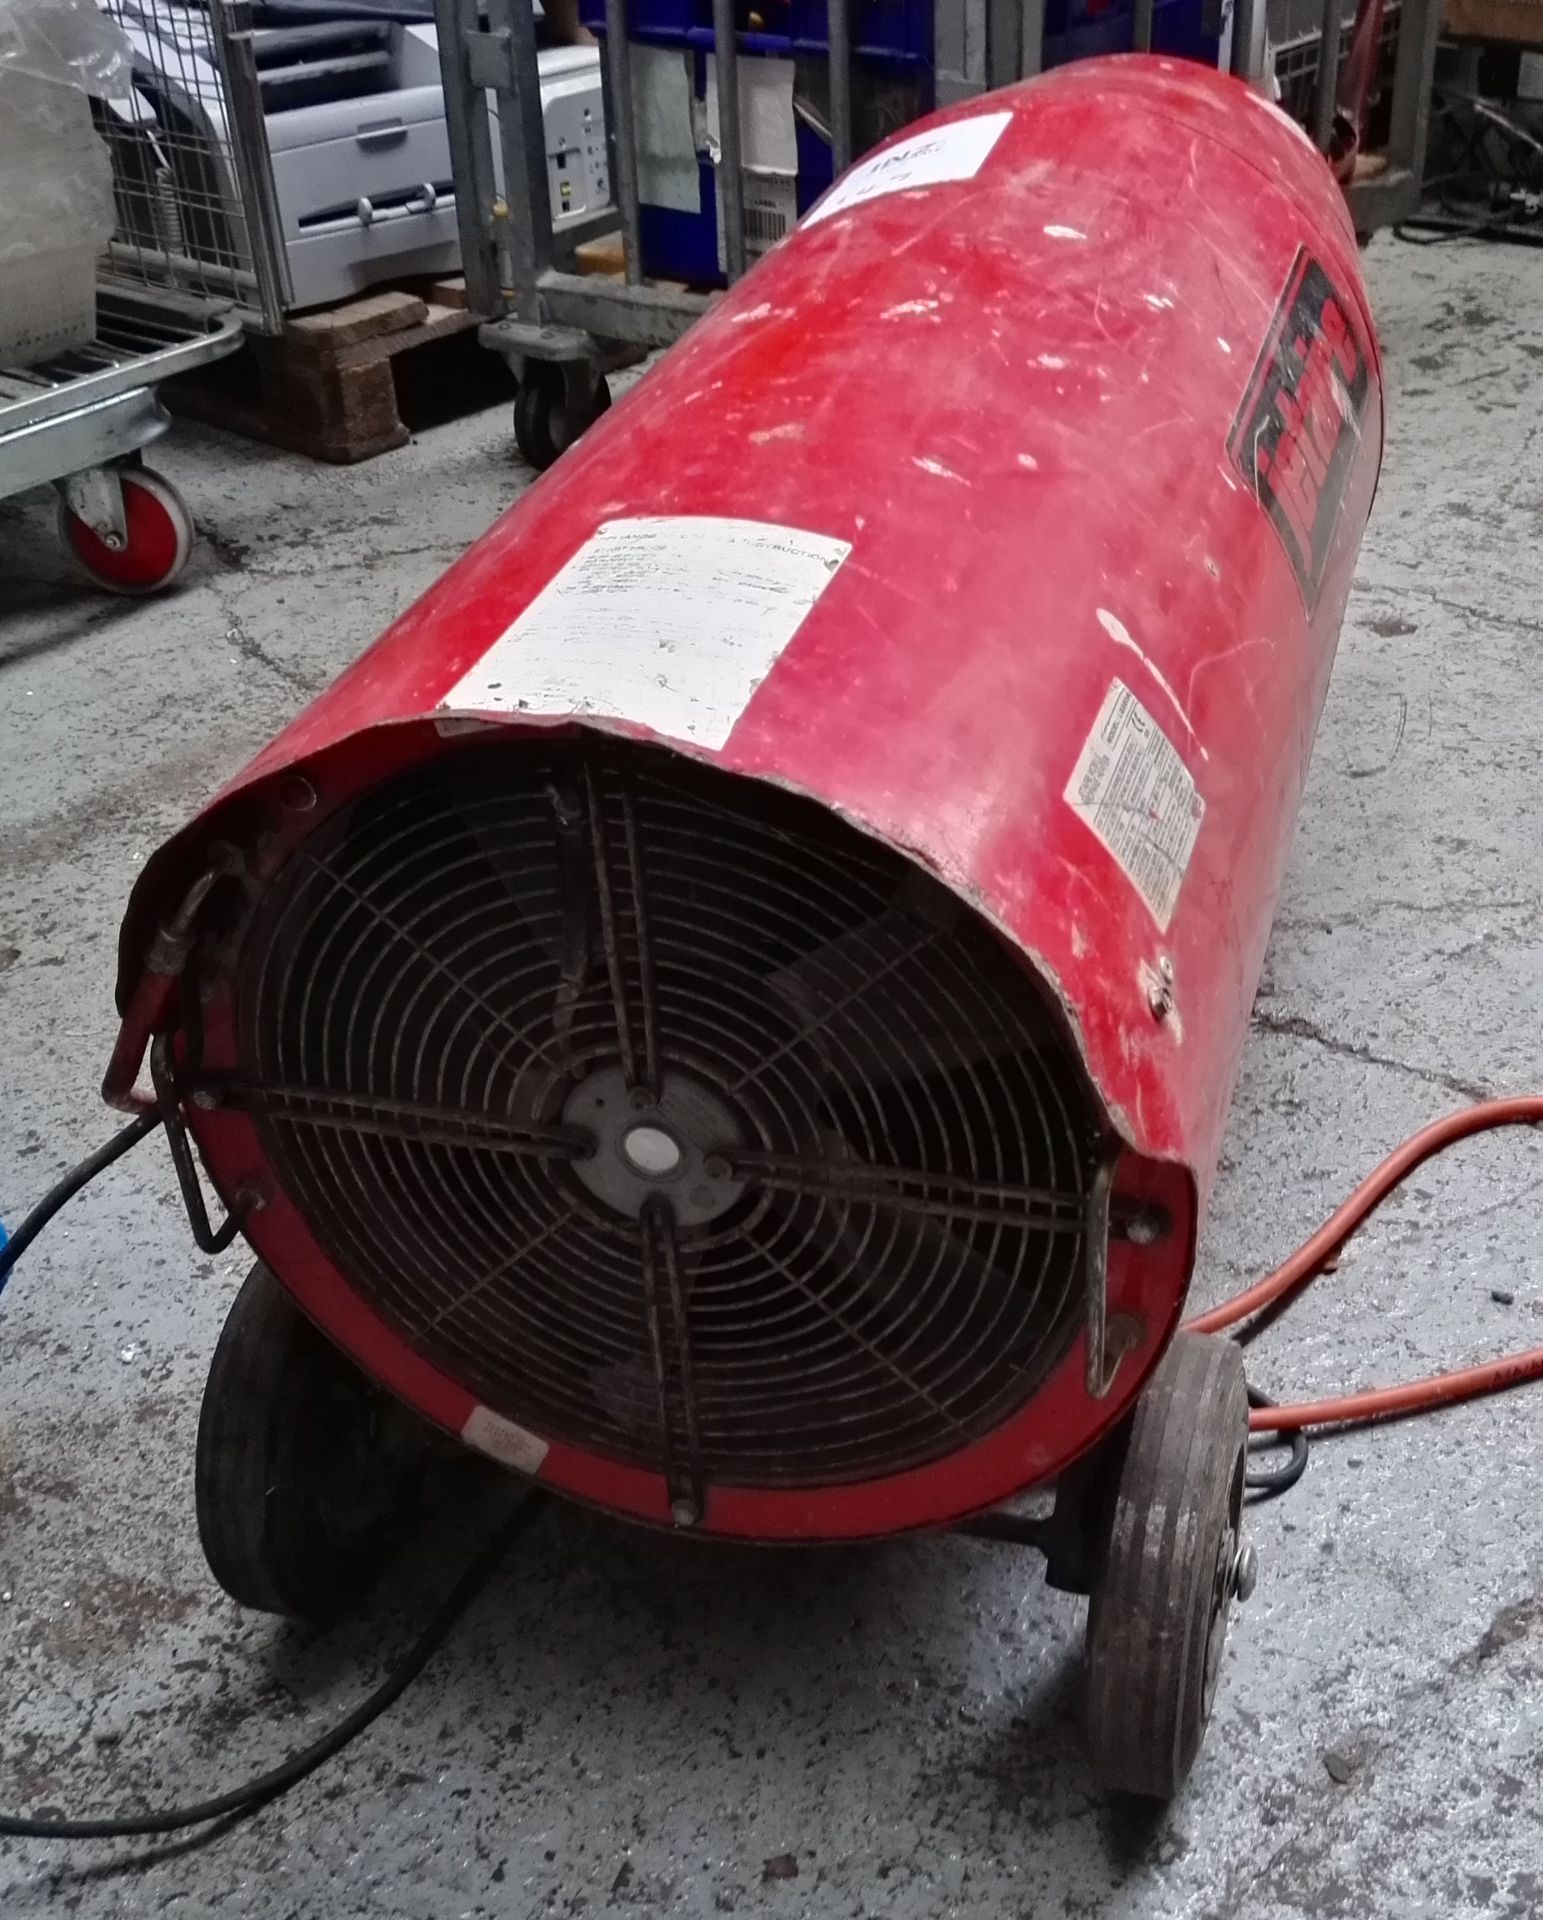 1 x Jetaire LG350A 100kW Mobile Propane Heater - CL011 - Location: Altrincham WA14 Removed from a wo - Image 16 of 16